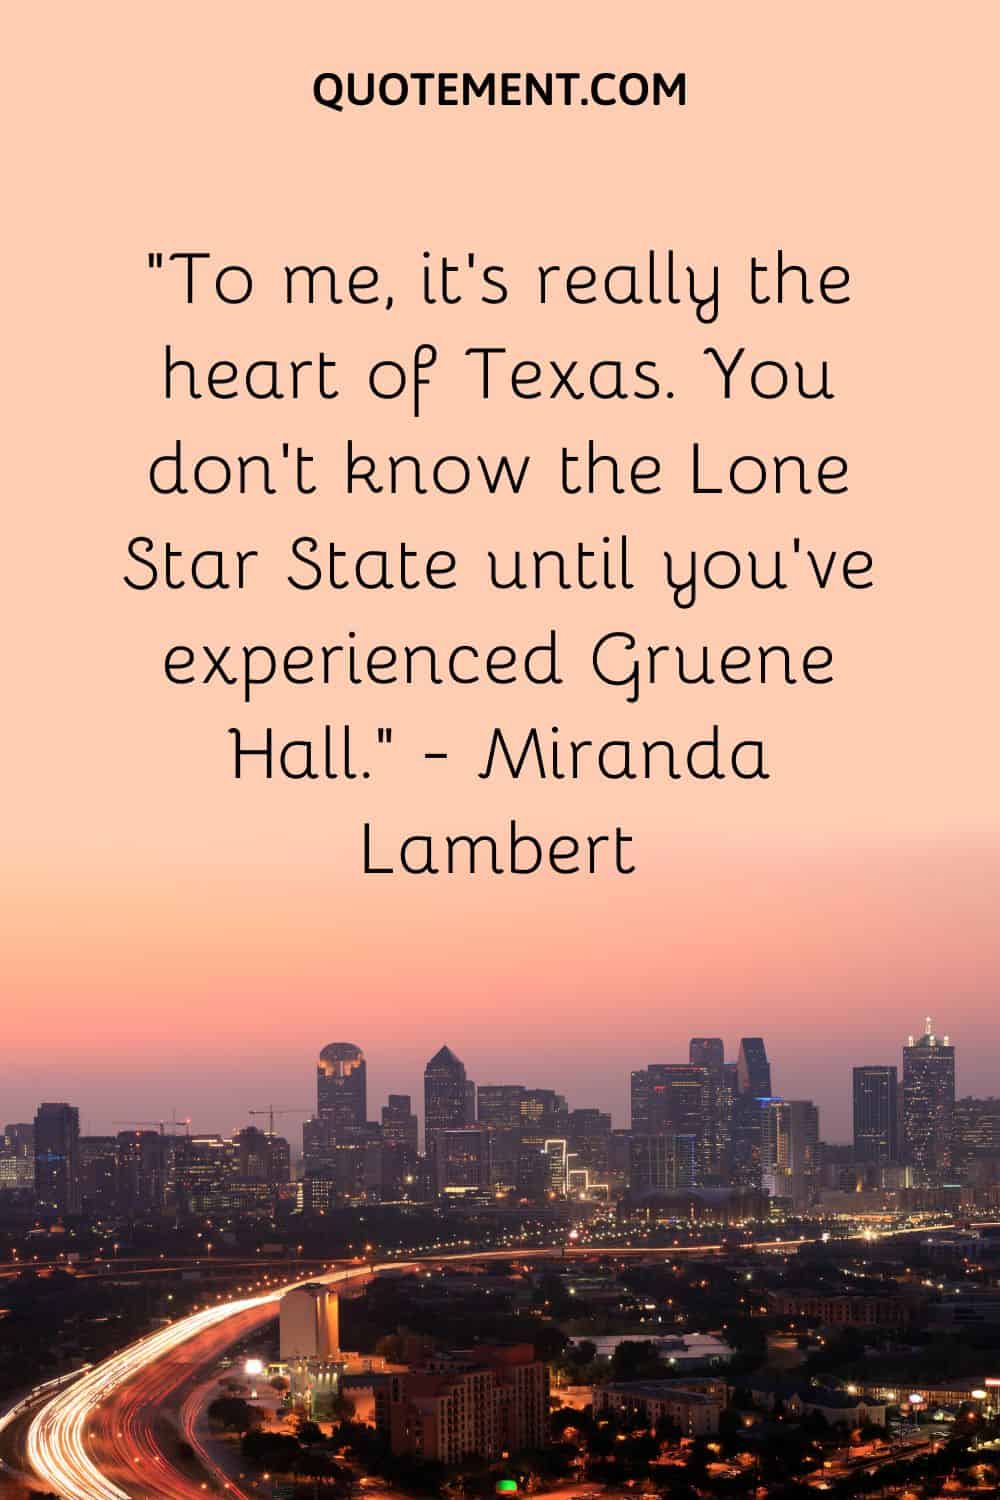 To me, it’s really the heart of Texas. You don’t know the Lone Star State until you’ve experienced Gruene Hall. – Miranda Lambert